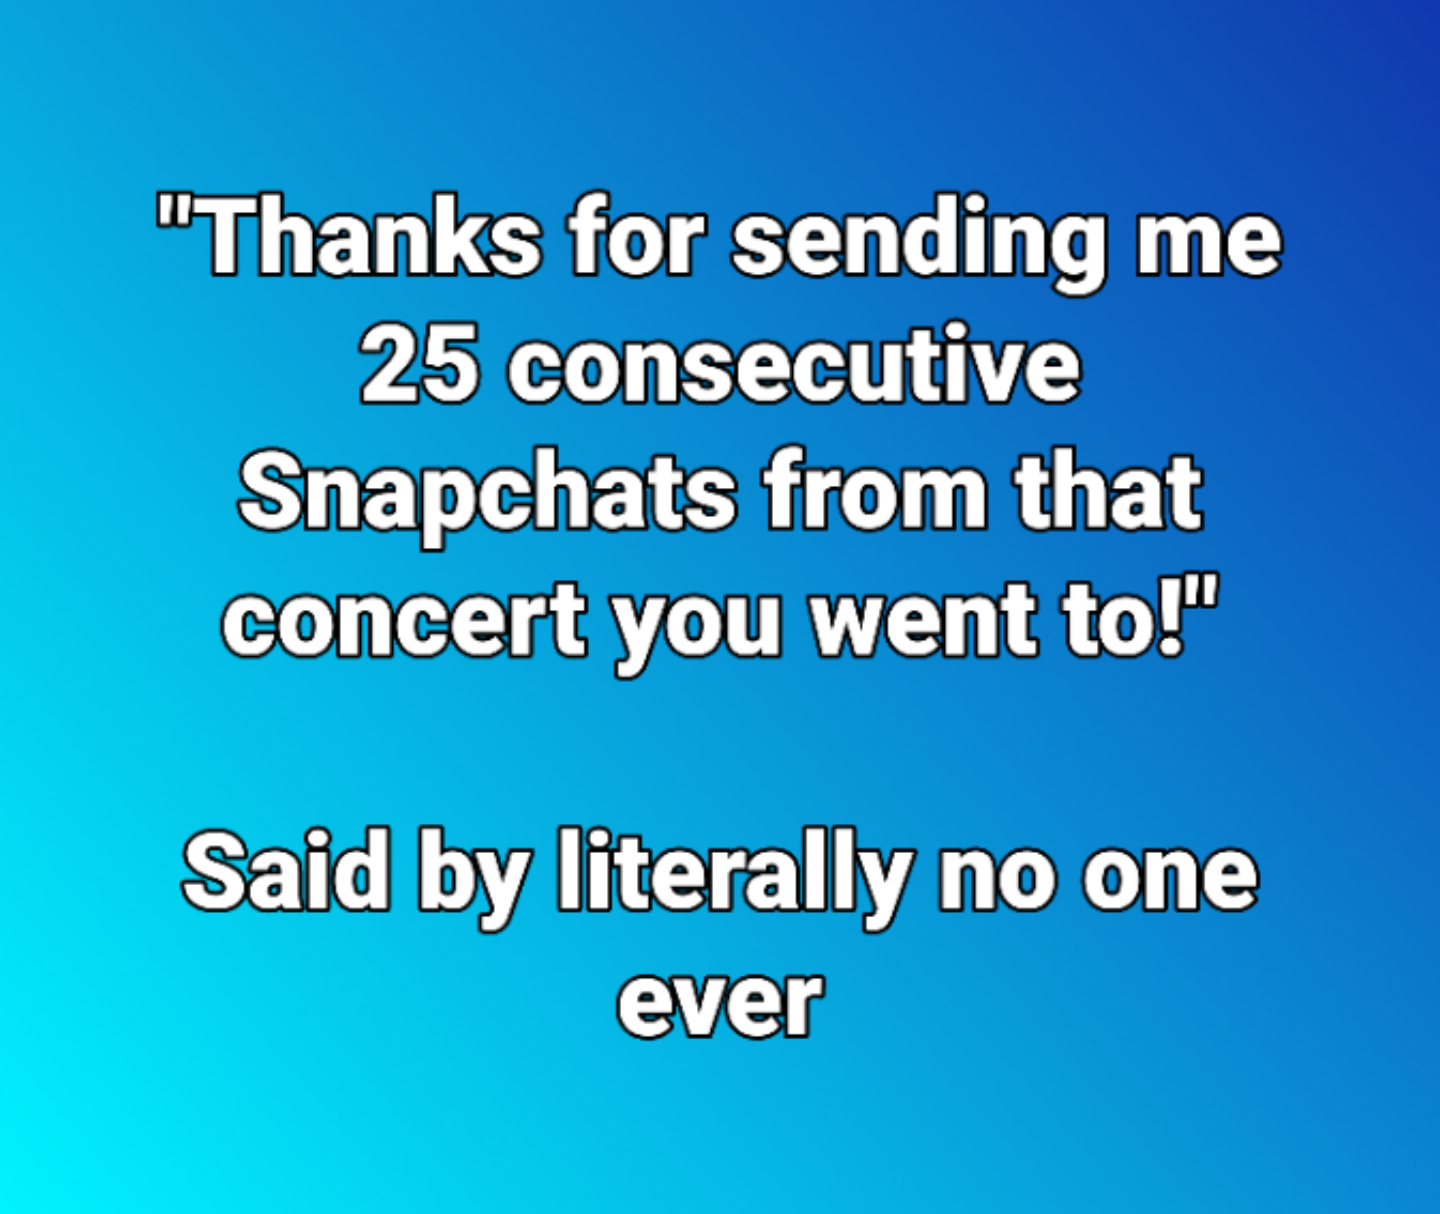 sky - "Thanks for sending me 25 consecutive Snapchats from that concert you went to!" Said by literally no one ever